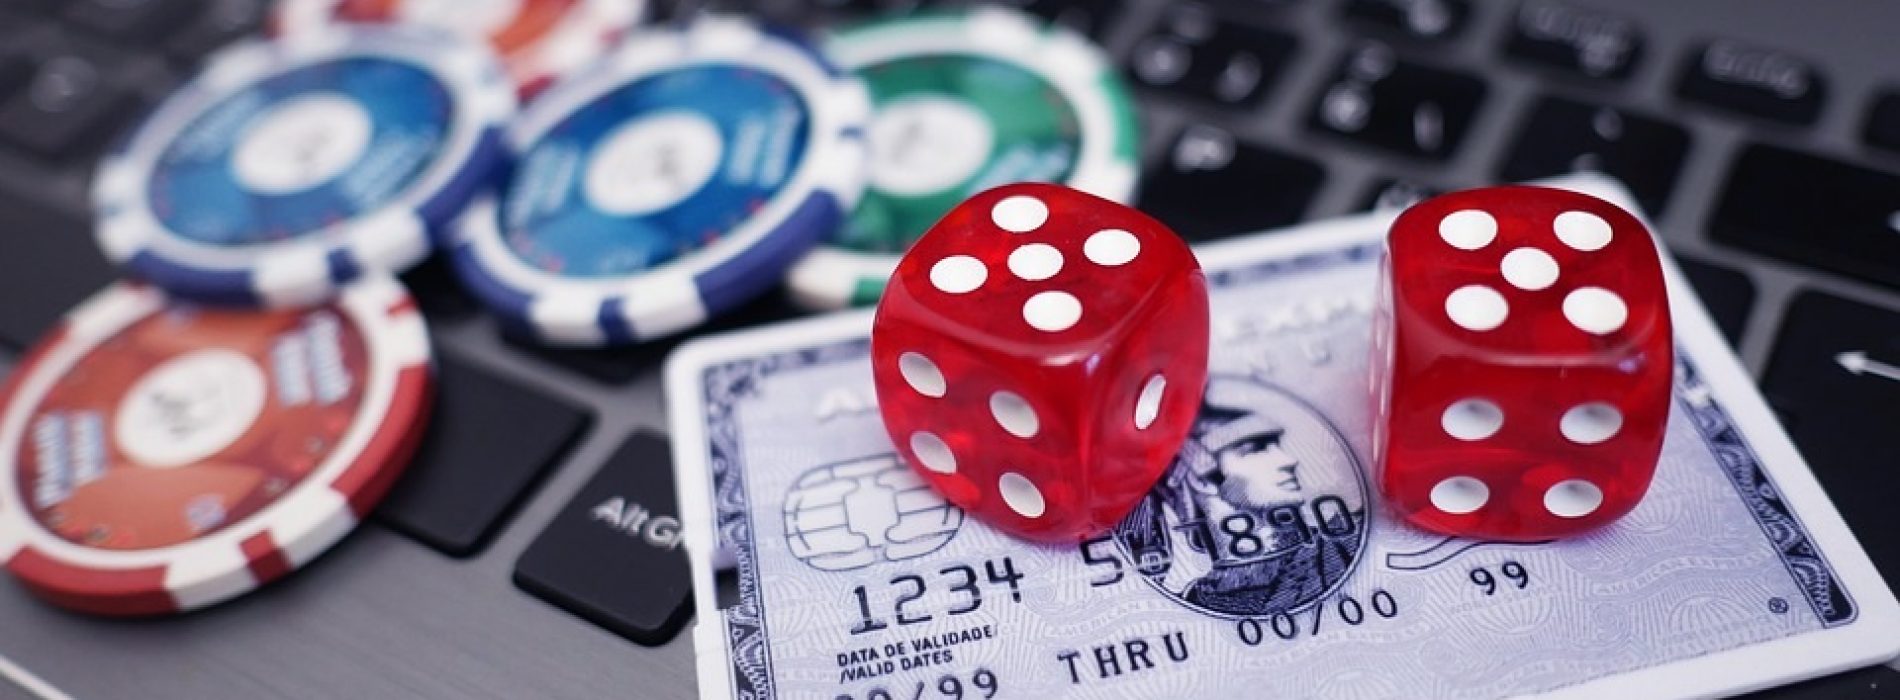 What are the perks of playing casino games on online casinos instead of visiting the real one?